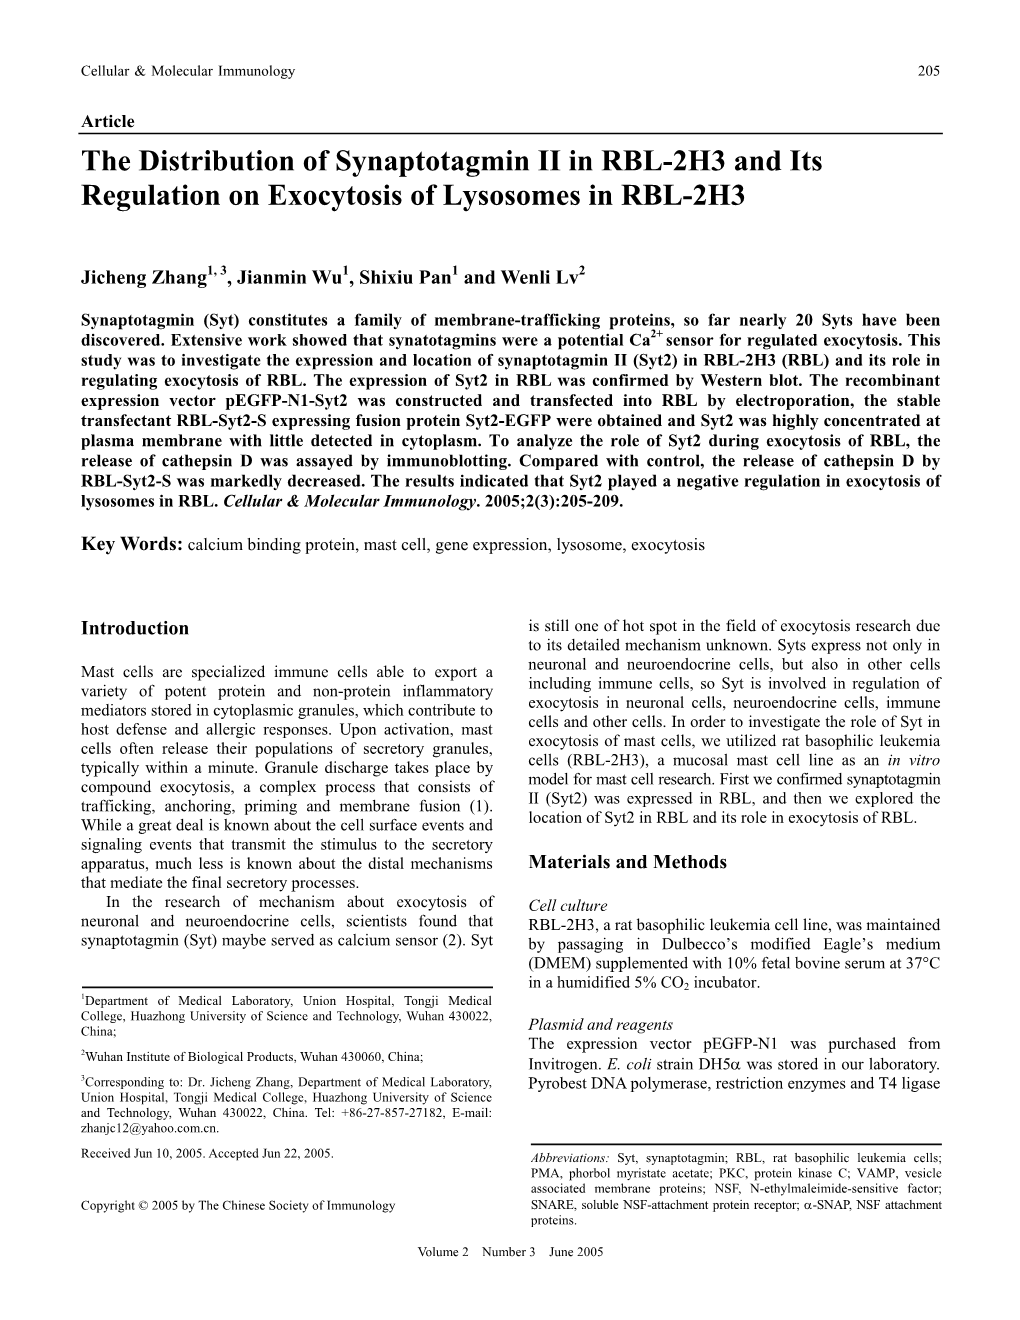 The Distribution of Synaptotagmin II in RBL-2H3 and Its Regulation on Exocytosis of Lysosomes in RBL-2H3